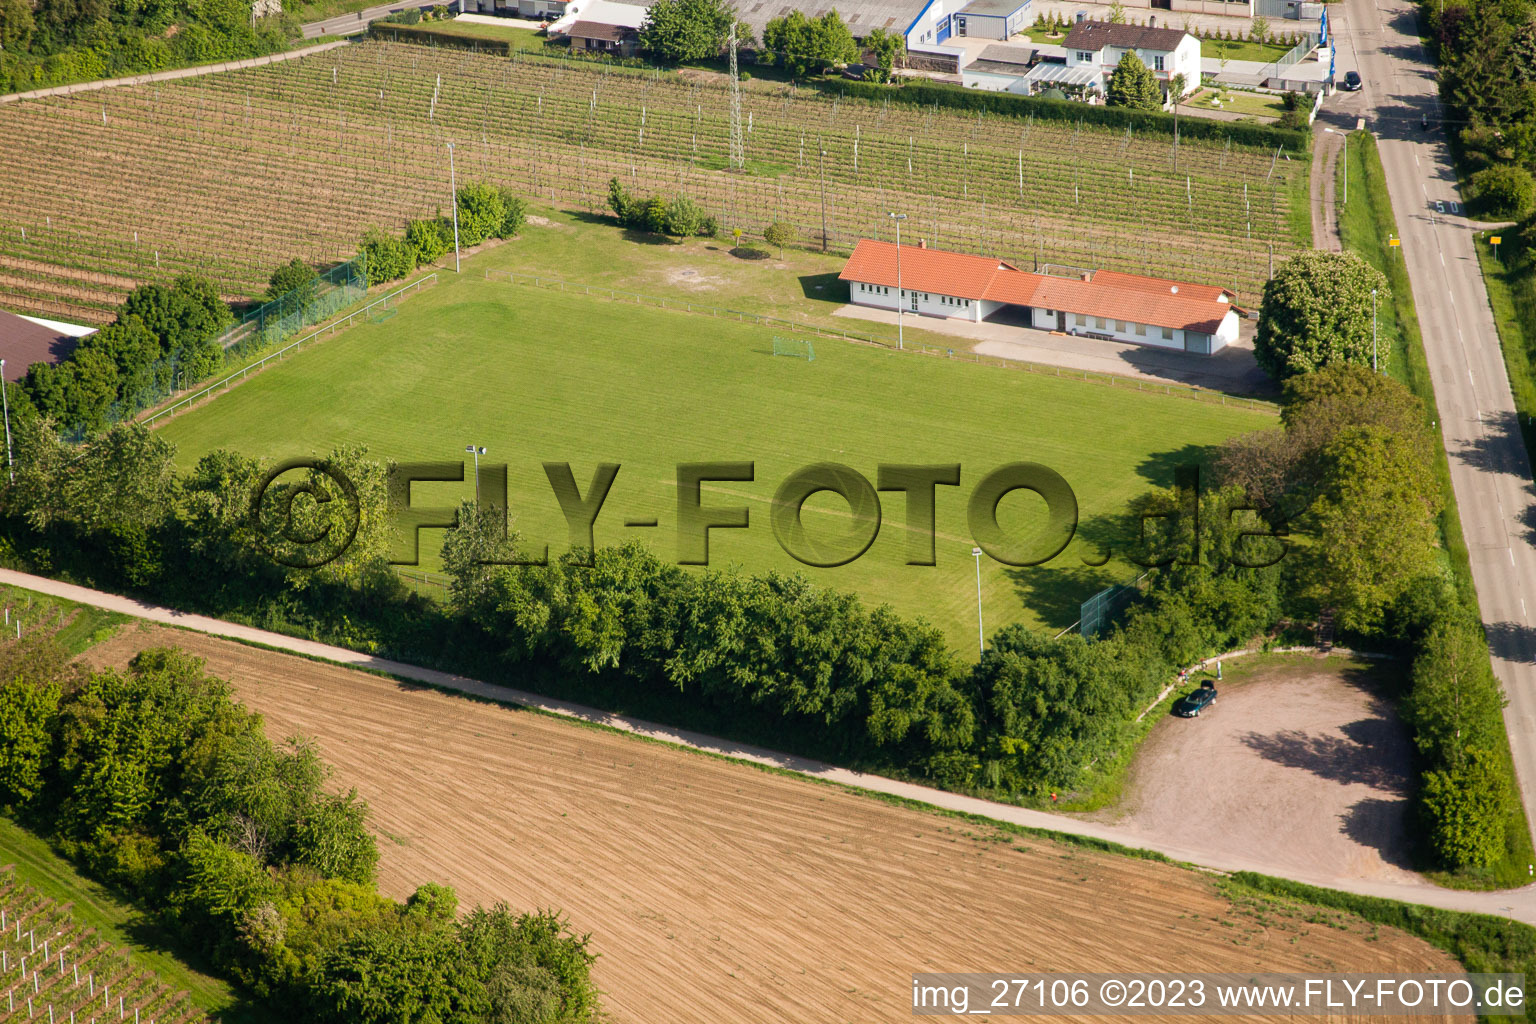 Aerial view of Sports ground in Impflingen in the state Rhineland-Palatinate, Germany